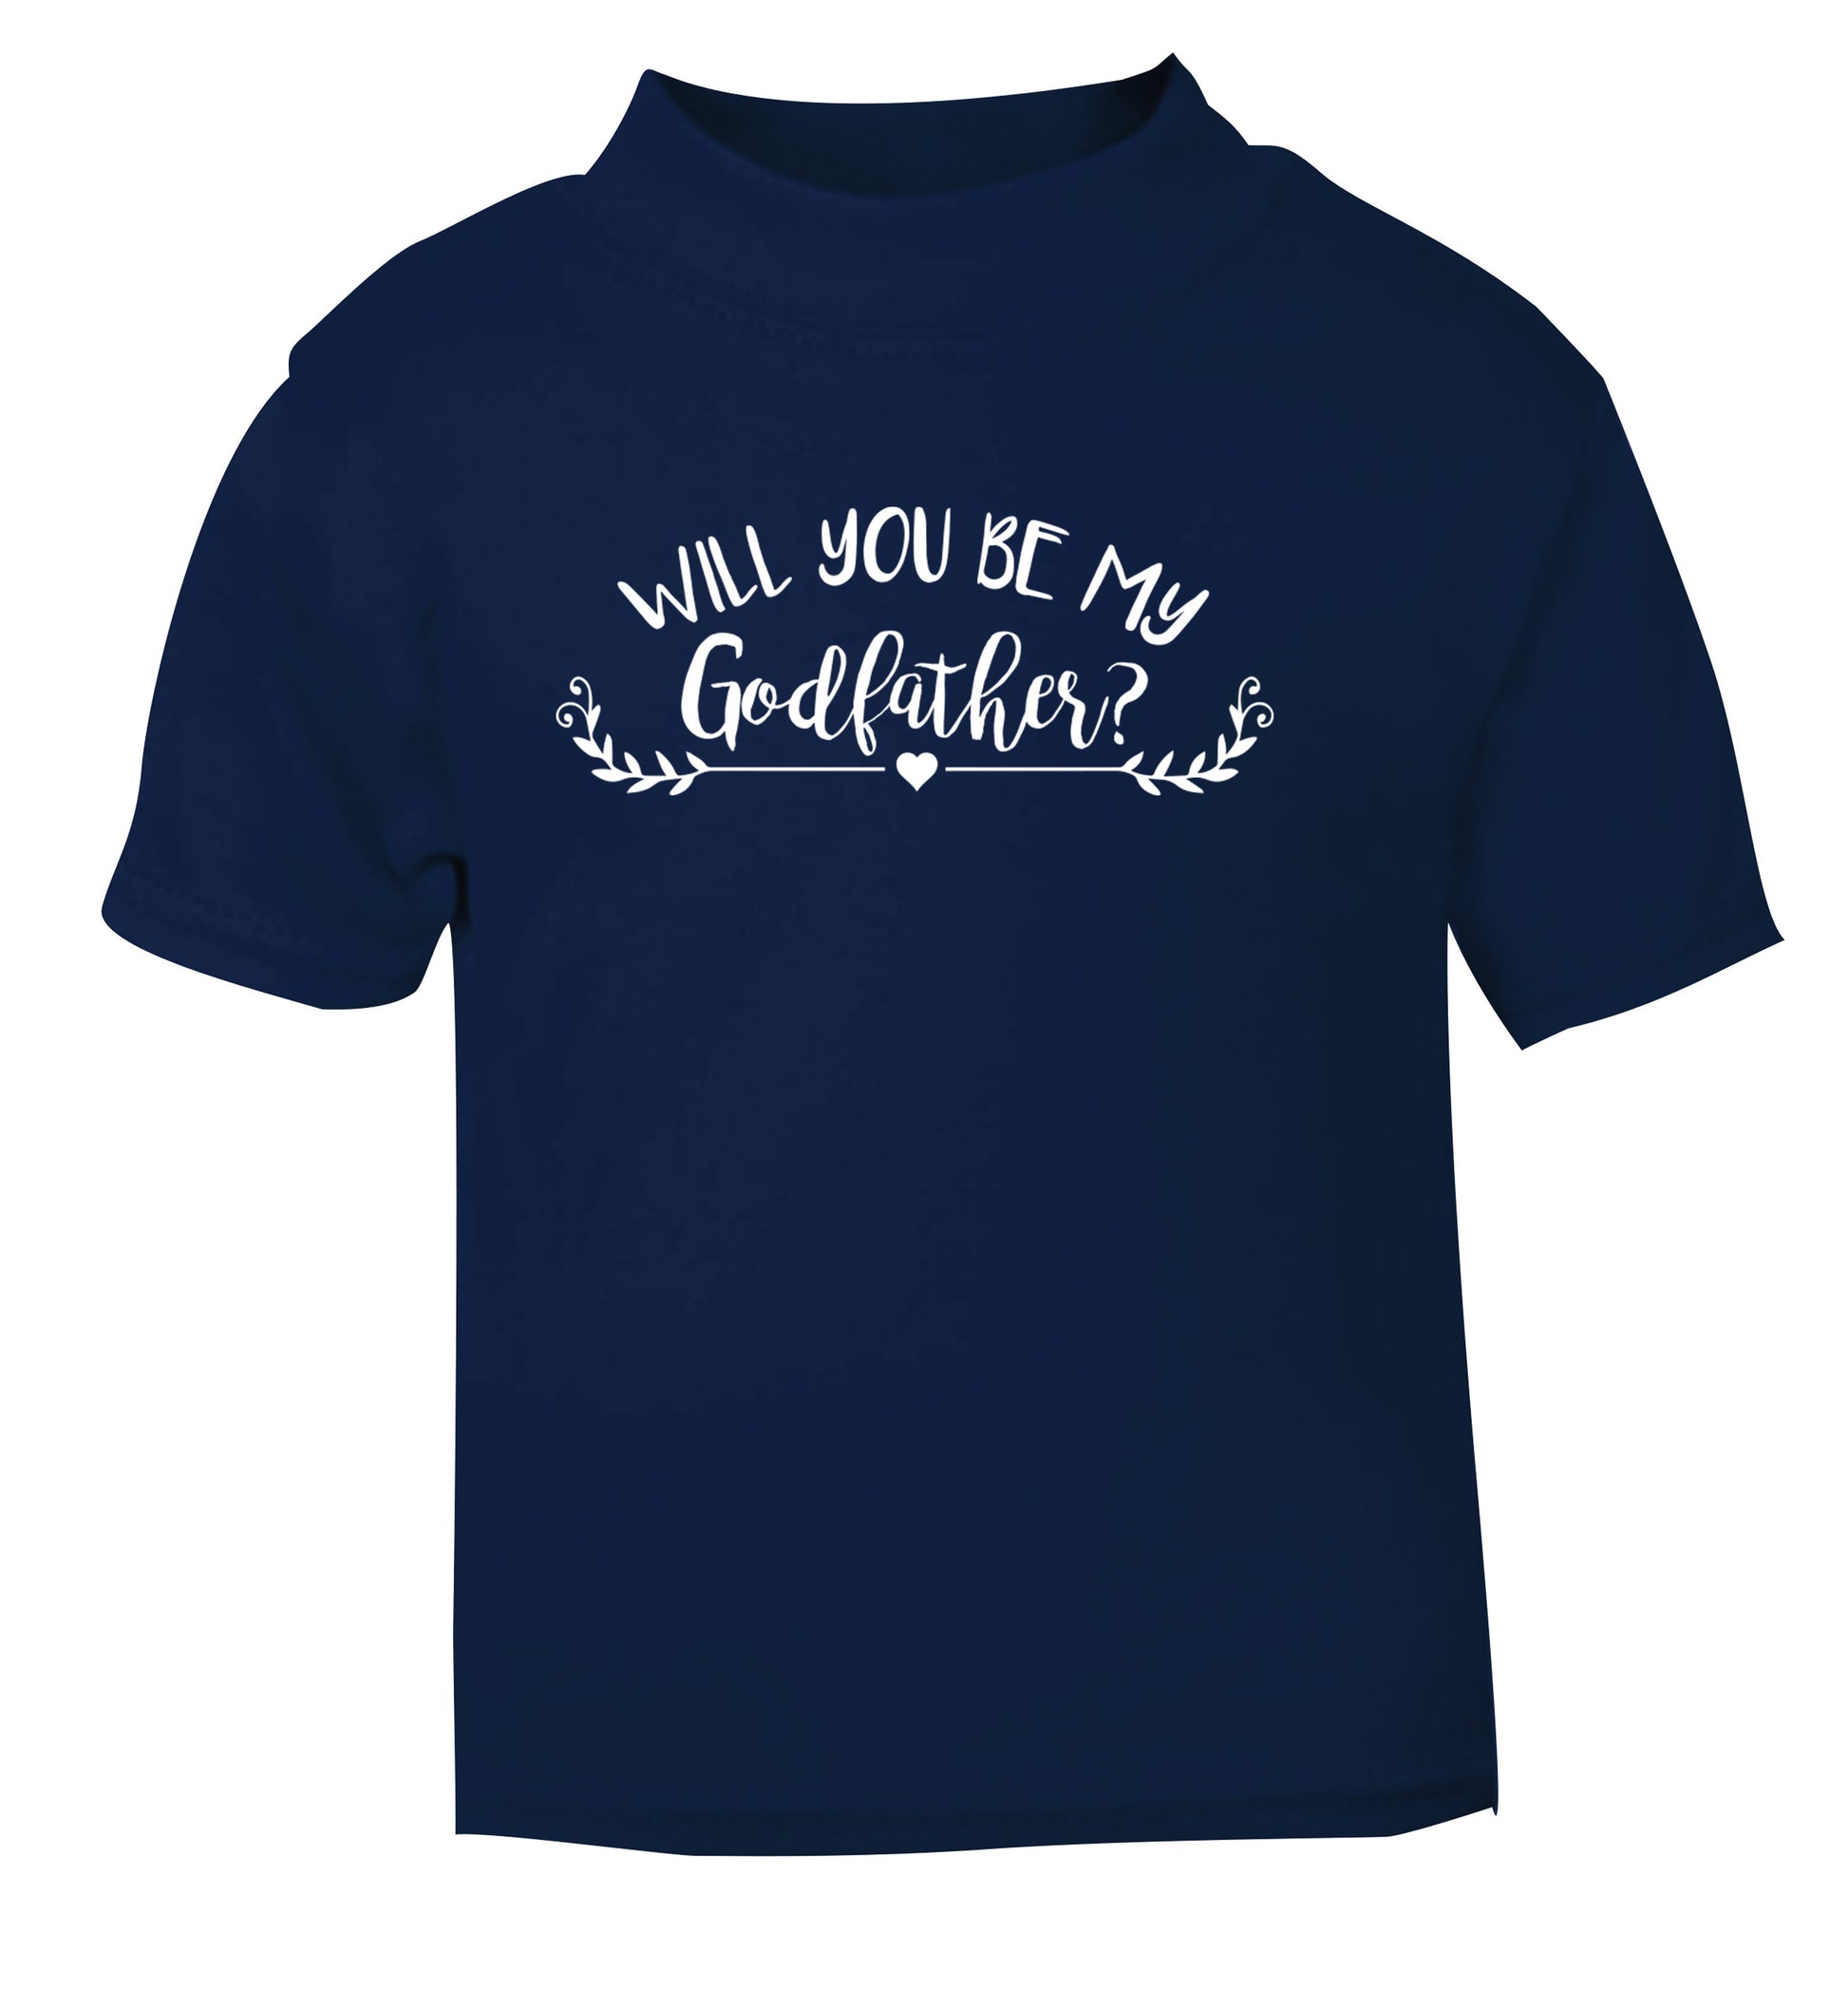 Will you be my godfather? navy Baby Toddler Tshirt 2 Years